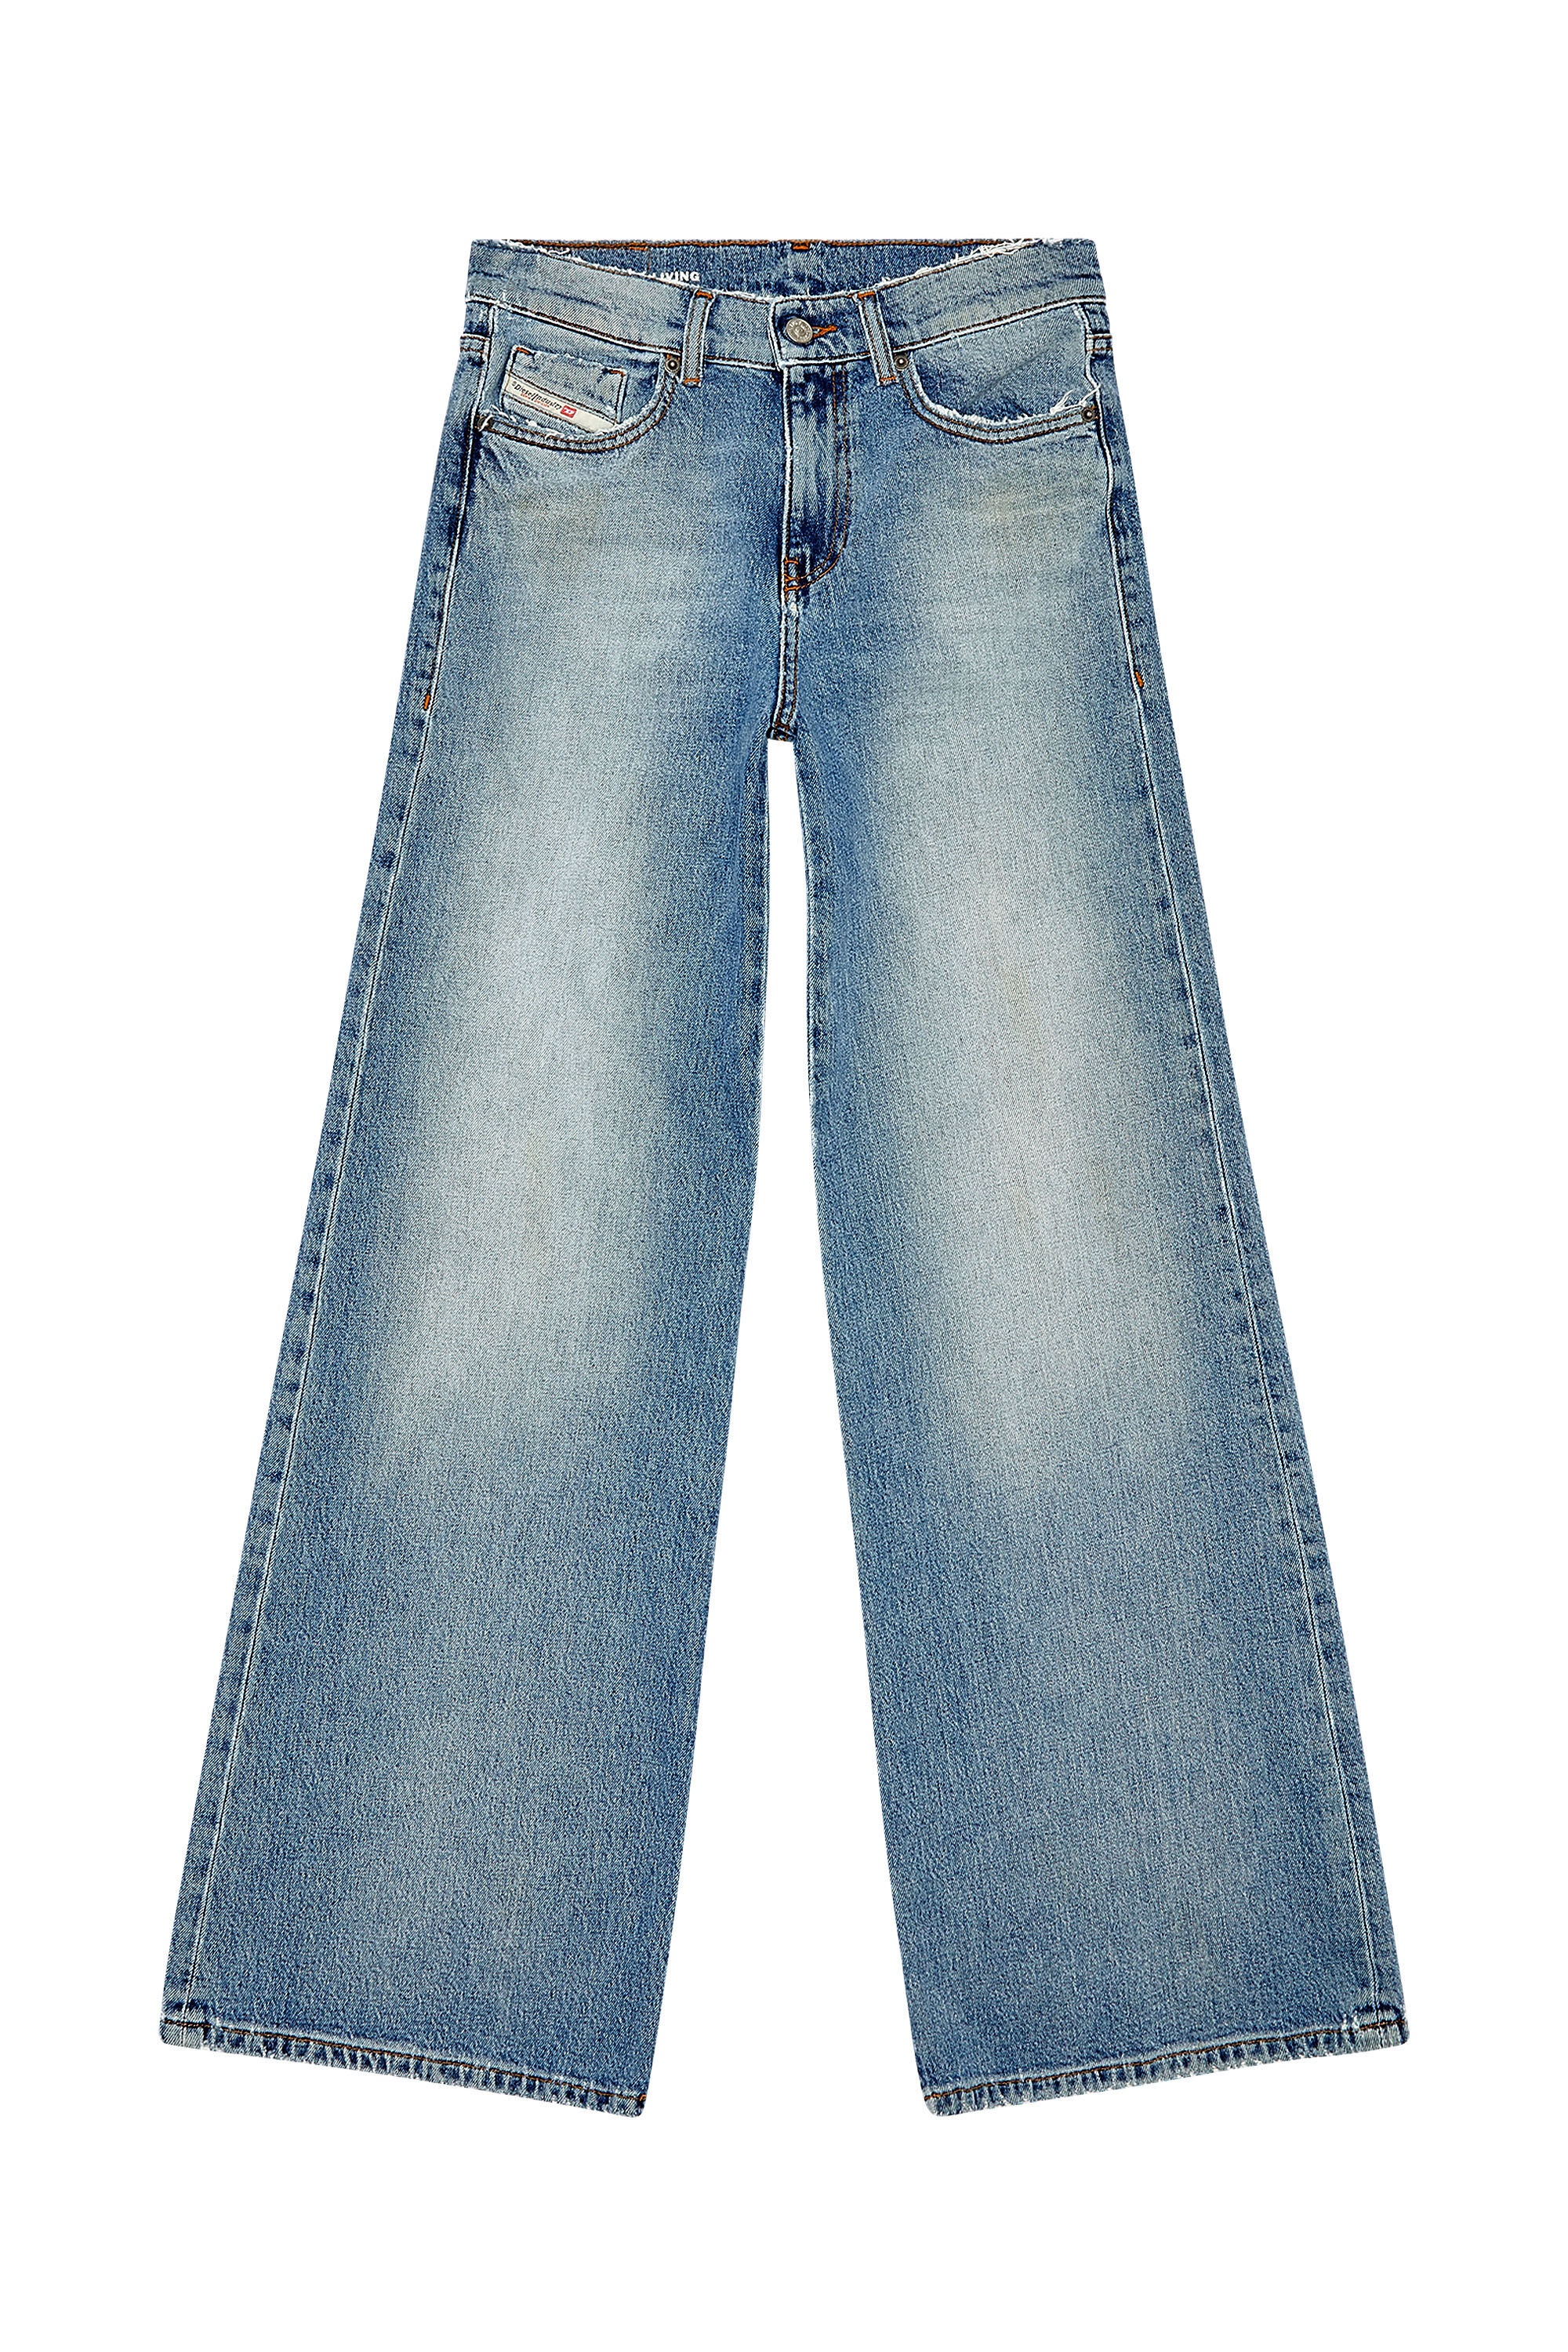 BOOTCUT AND FLARE JEANS 1978 D-AKEMI 0DQAD - 1